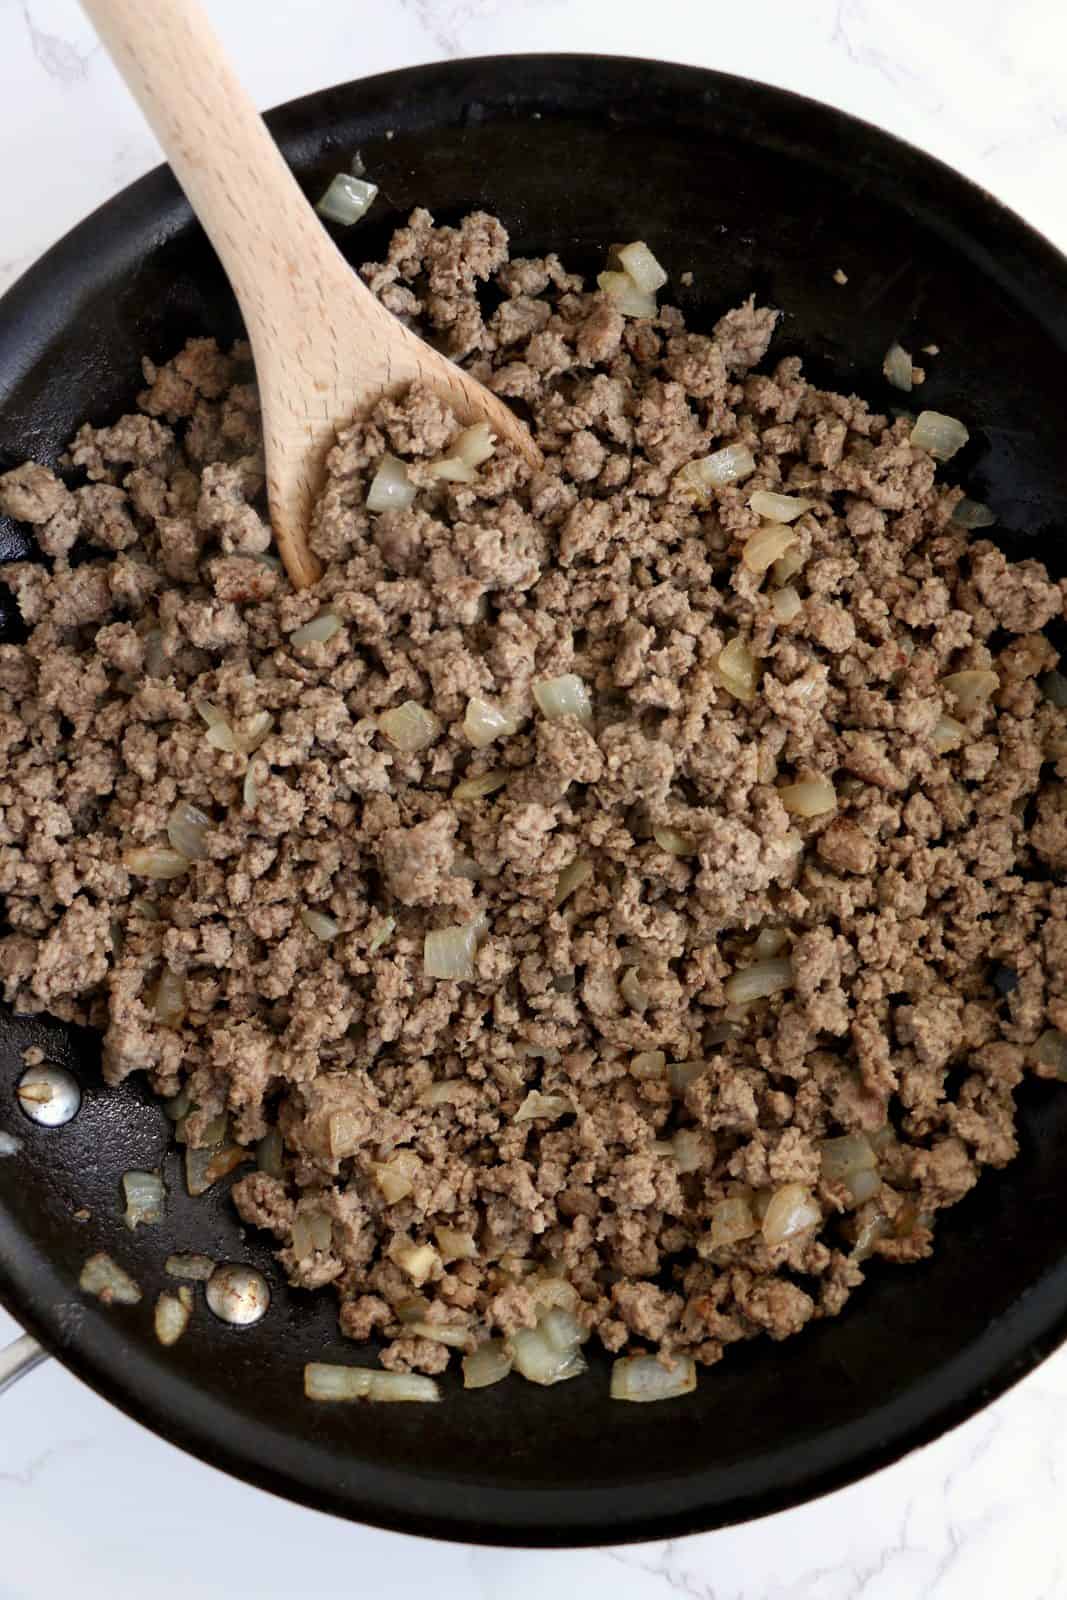 Ground beef and onion cooked in saute pan.